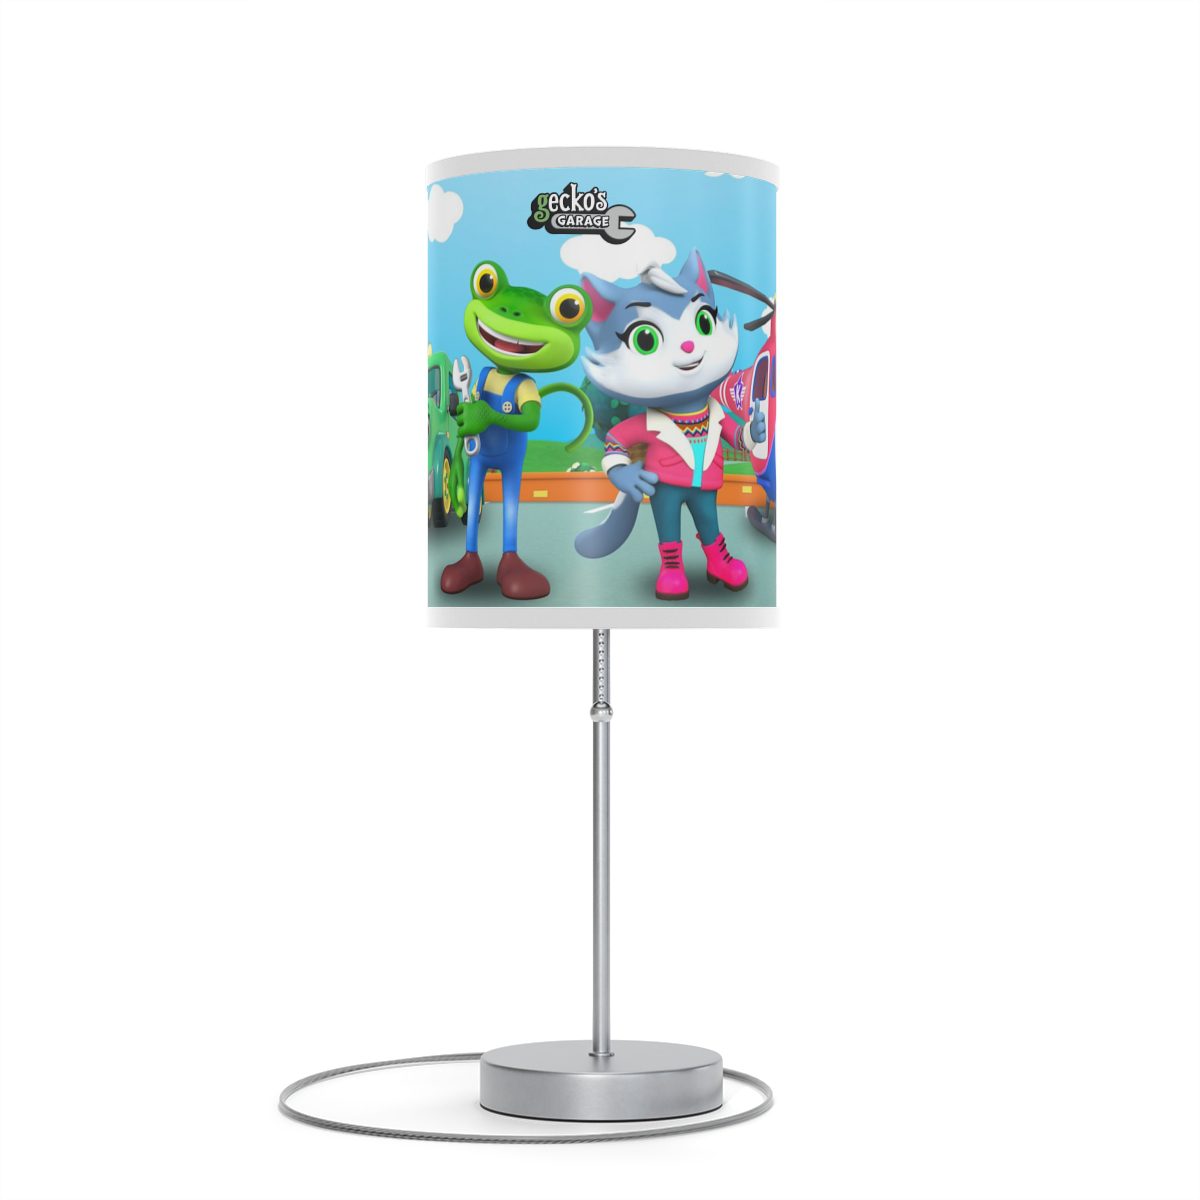 Gecko’s Garage Main Characters Lamp on a Stand Cool Kiddo 22